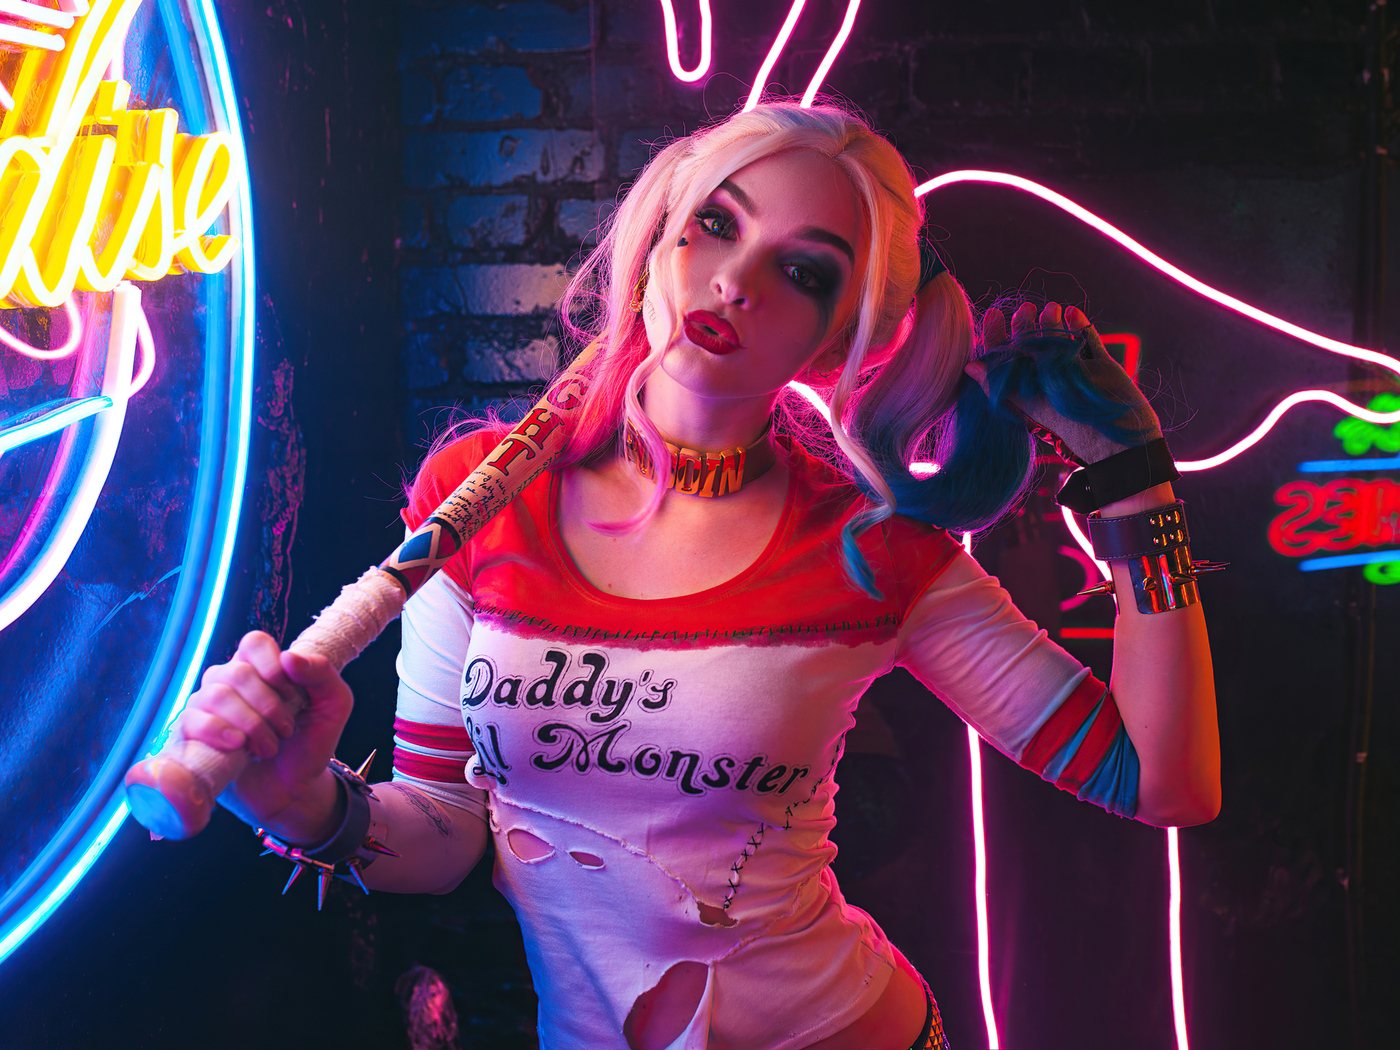 harley-quinn-suicide-squad-with-bat-4k-dq.jpg